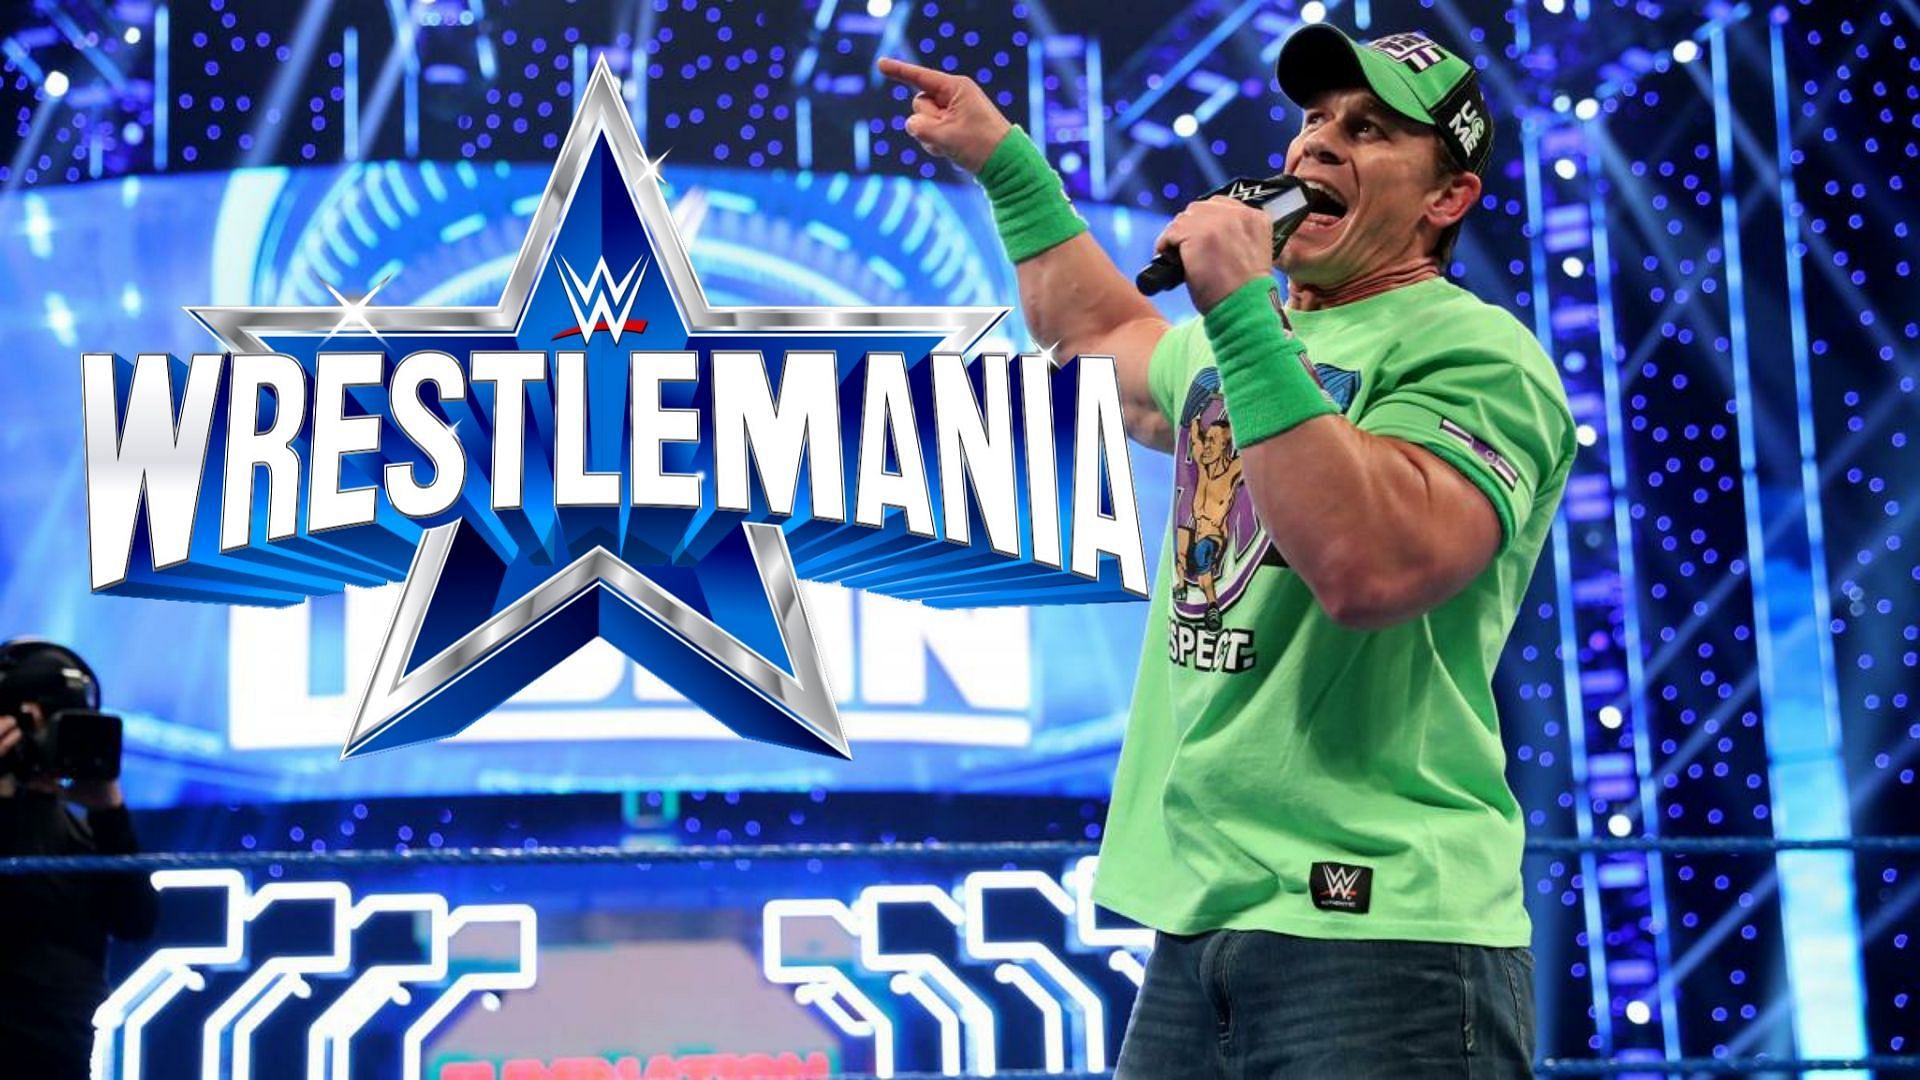 Would you like to see John Cena make an appearance this weekend?